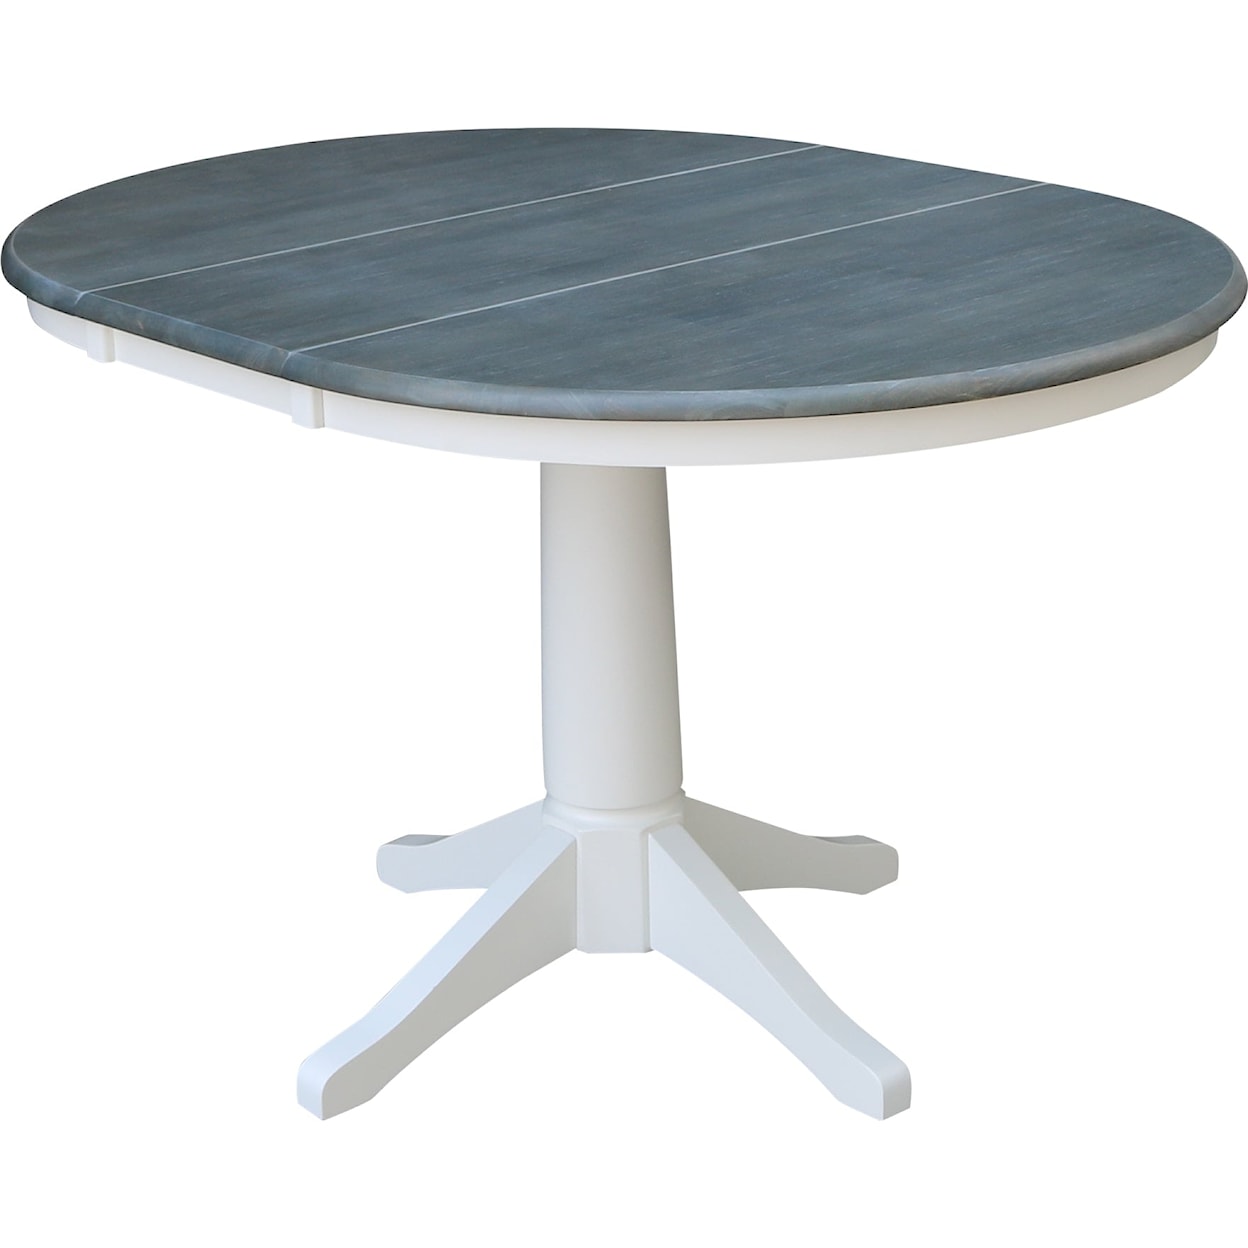 John Thomas Dining Essentials Round Table in Heather Gray/ White